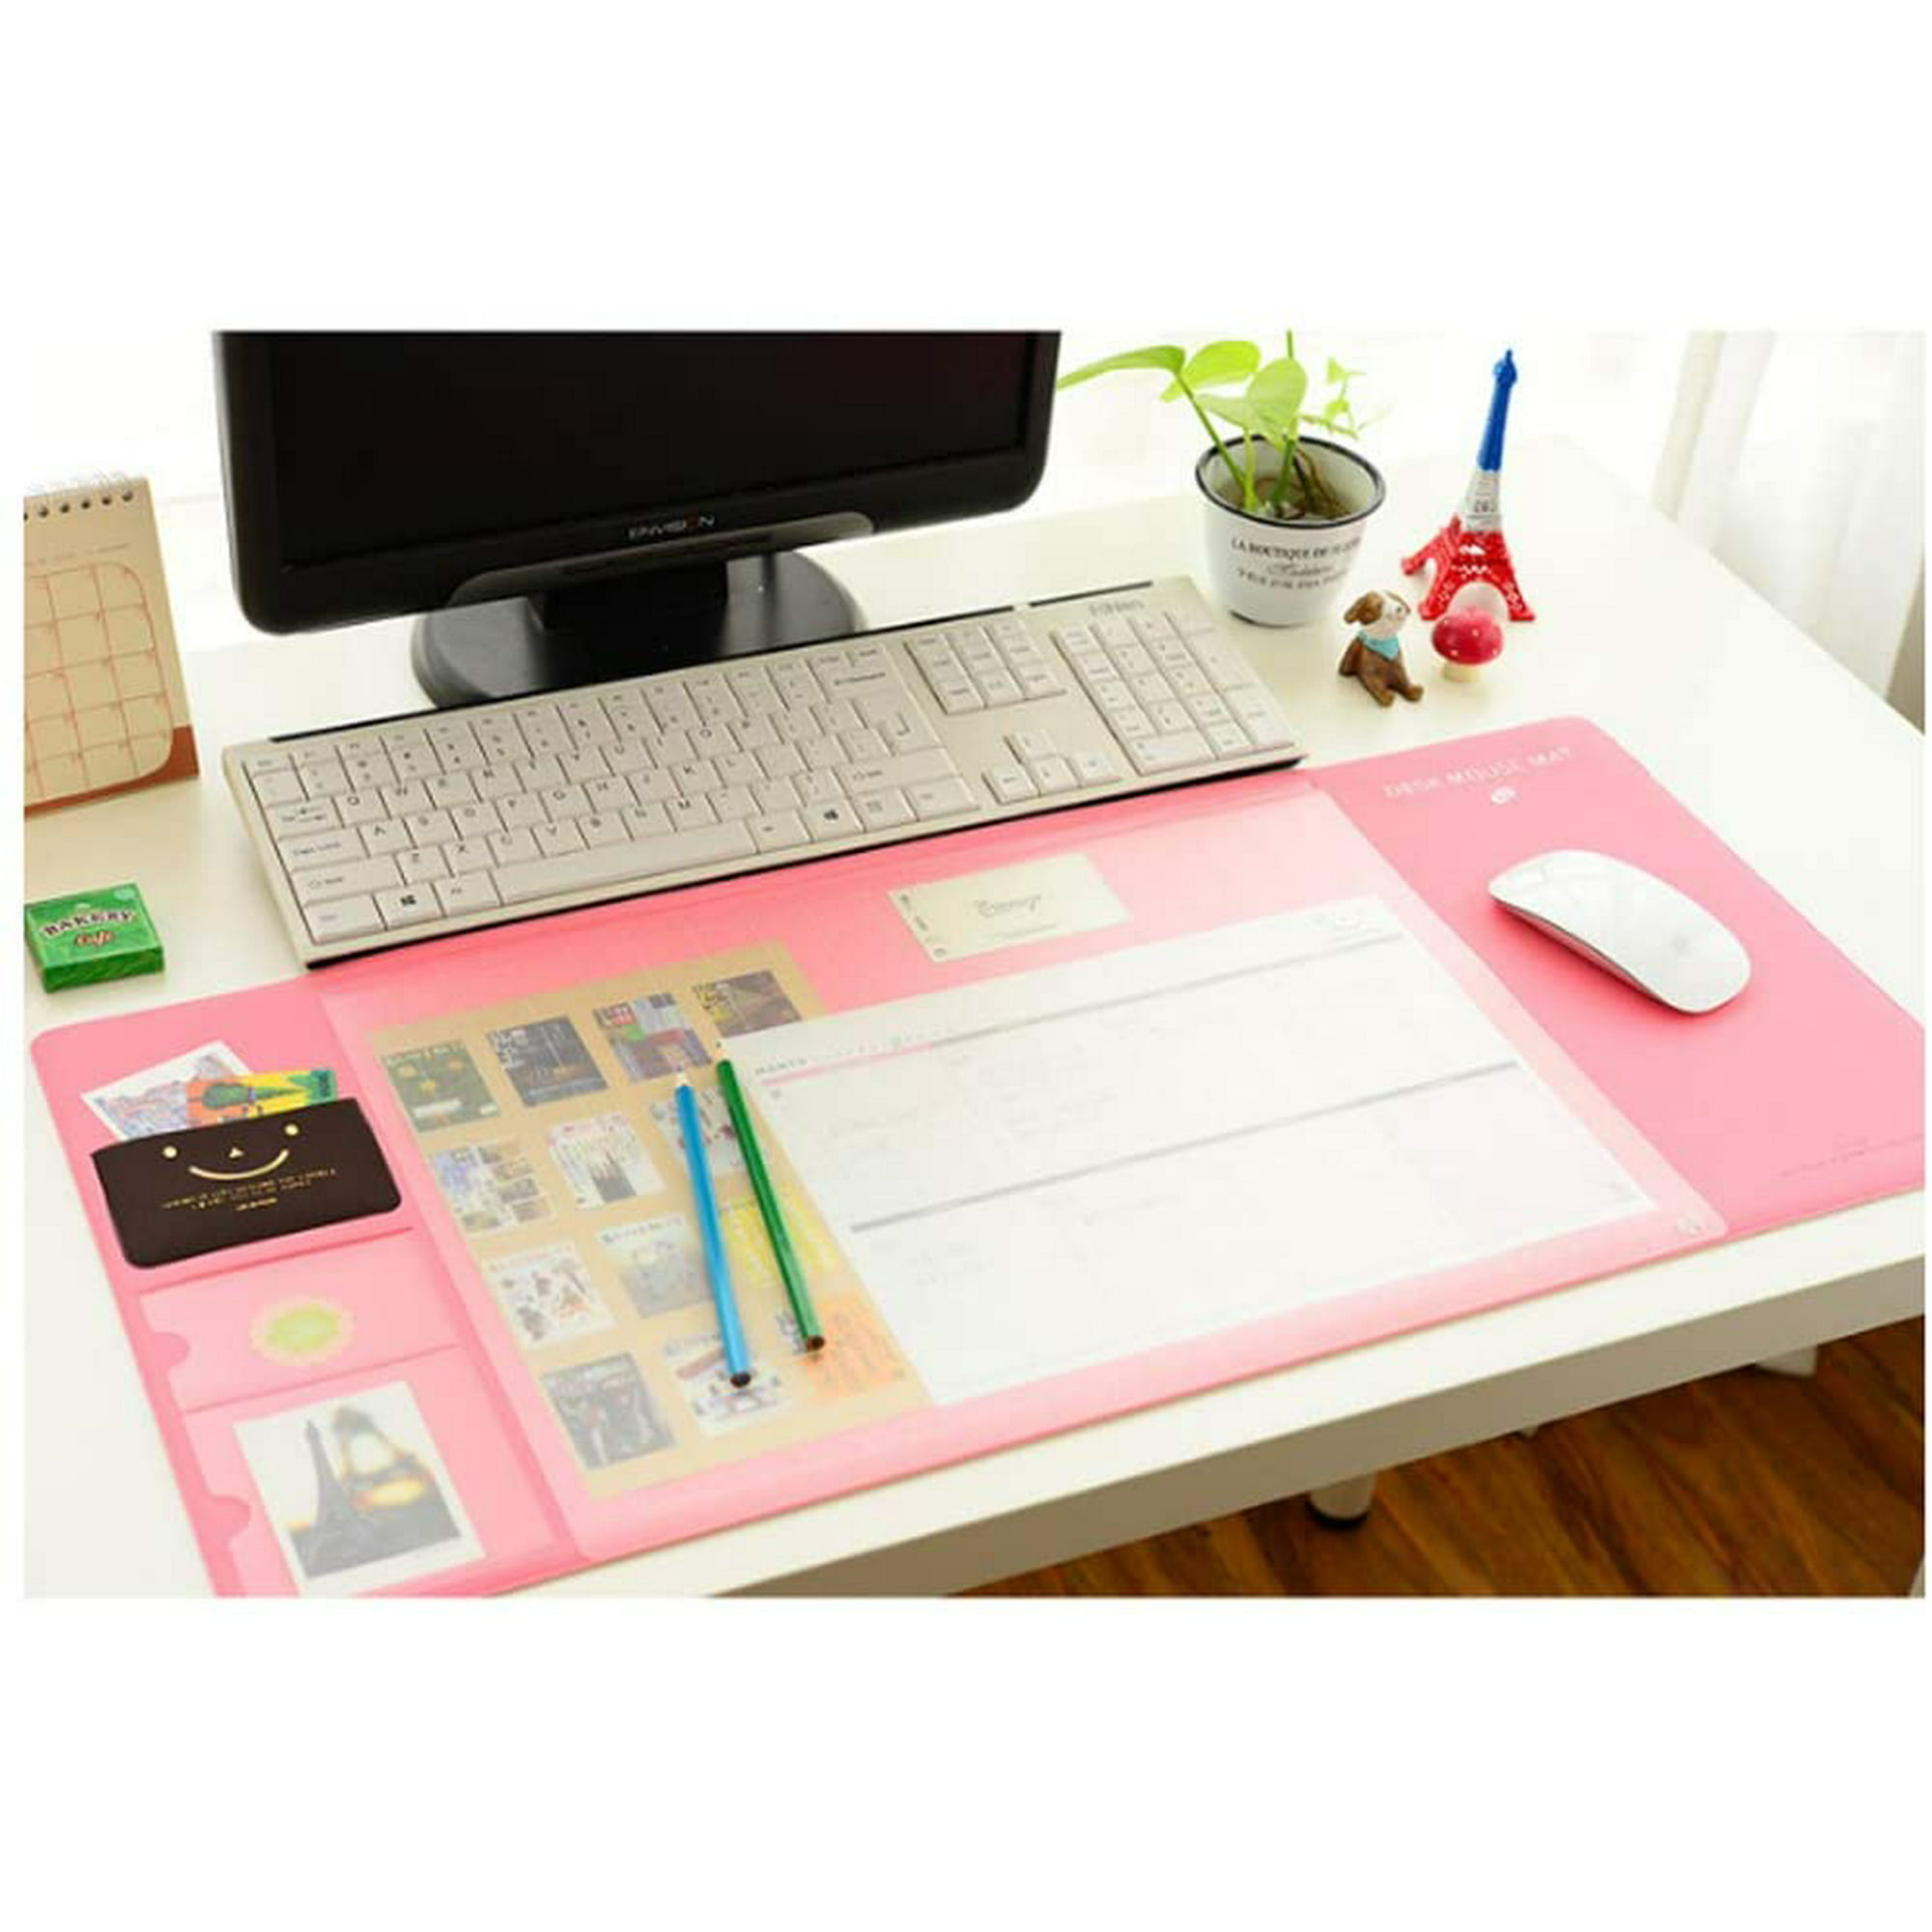 Seabed Desk Mat Large Size Mouse Pad, Large Desk Protector Material